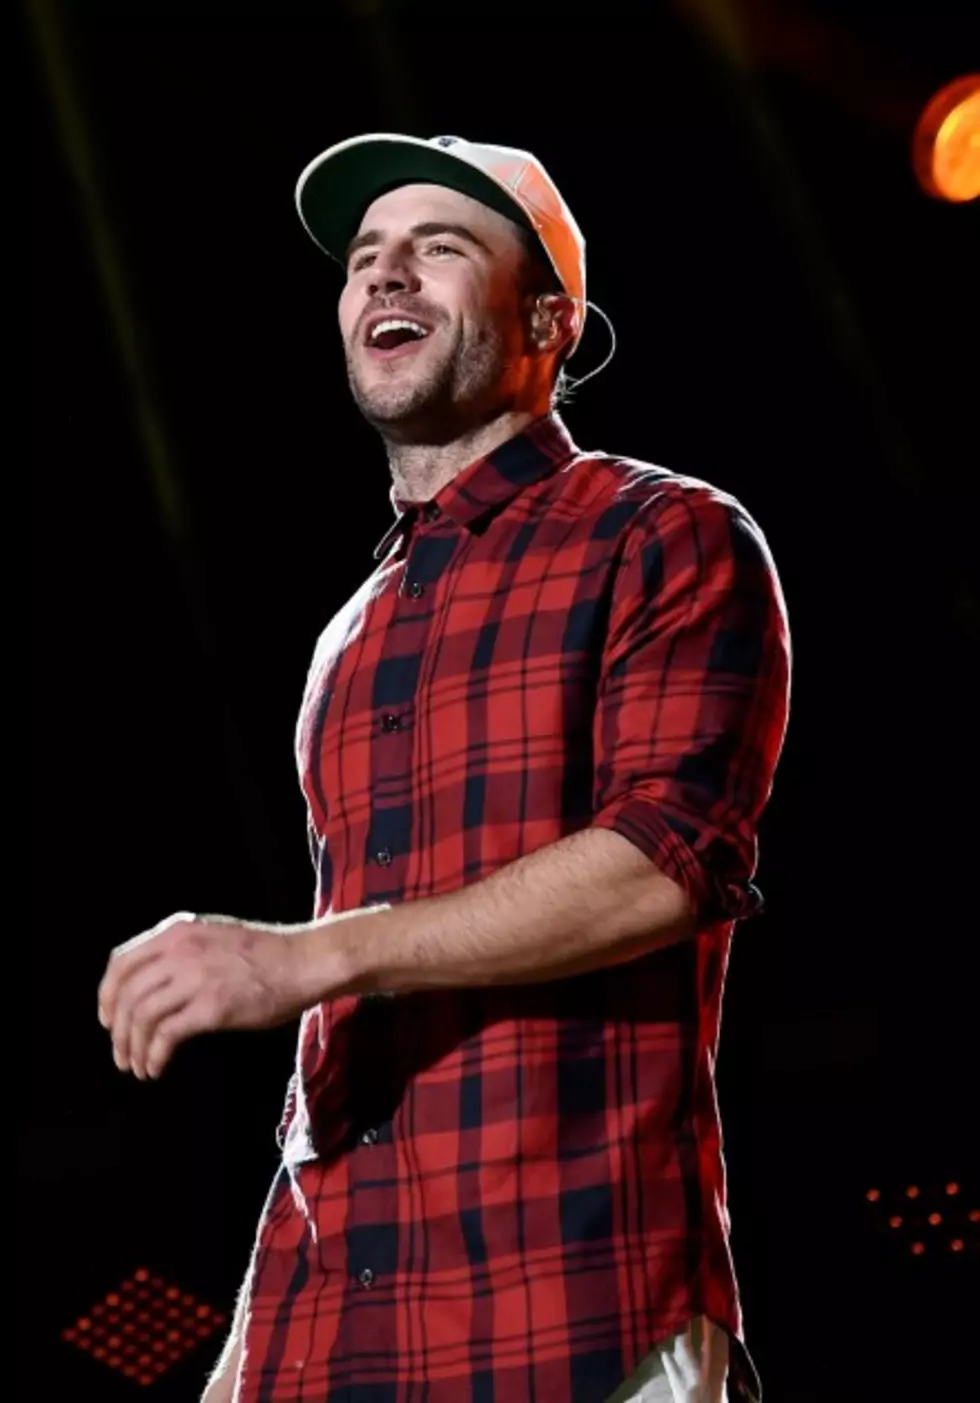 Is Sam Hunt Looking For Love? [VIDEO]